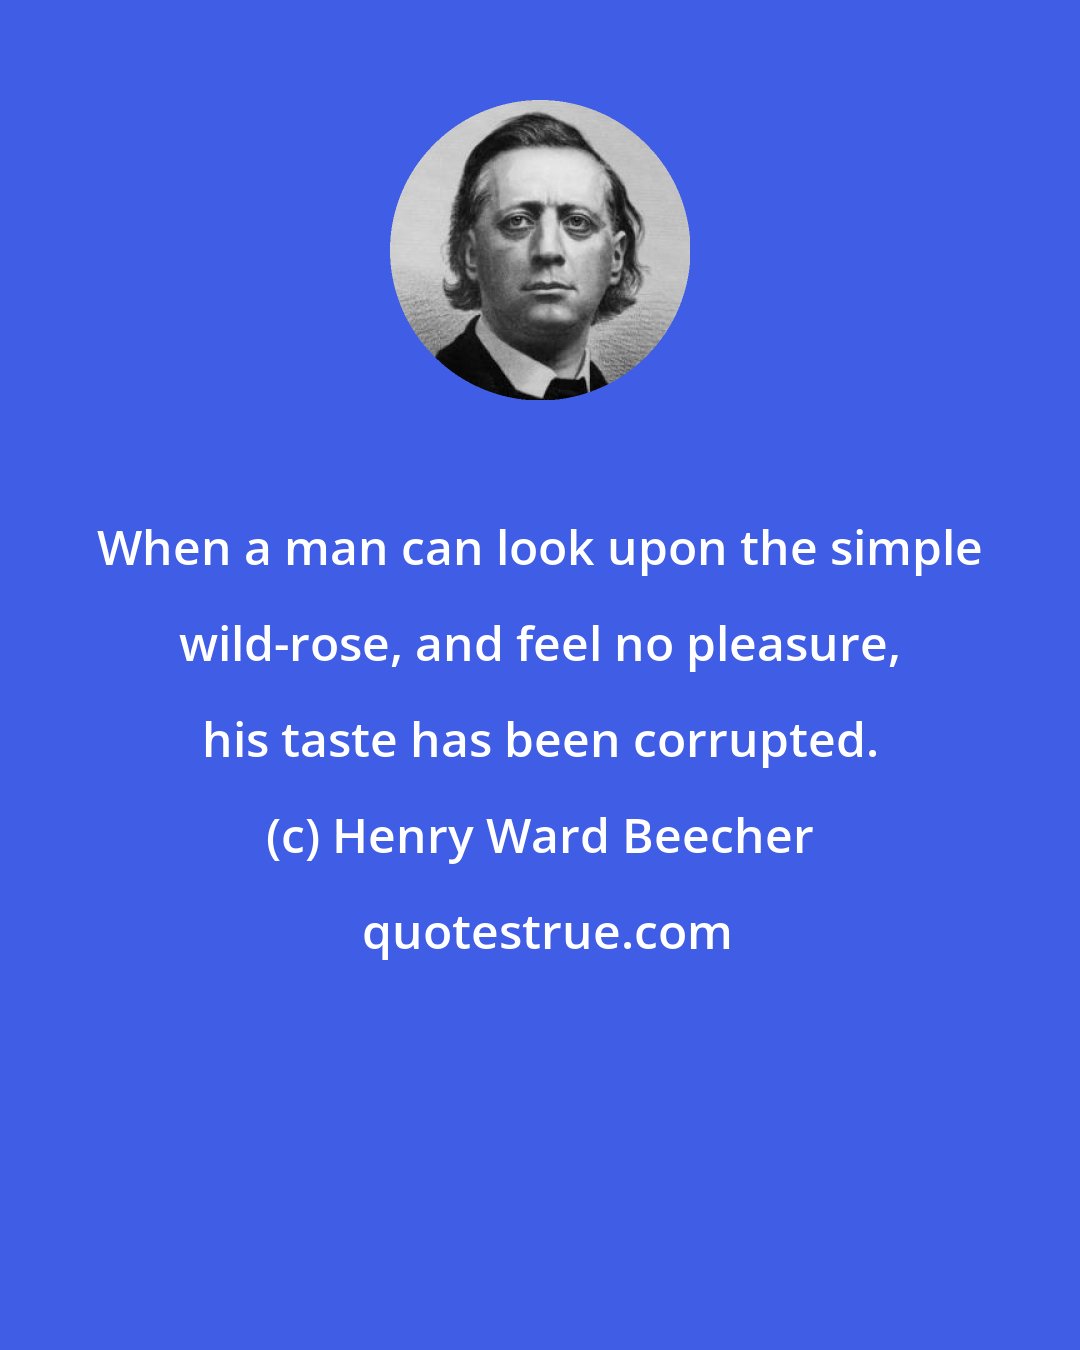 Henry Ward Beecher: When a man can look upon the simple wild-rose, and feel no pleasure, his taste has been corrupted.